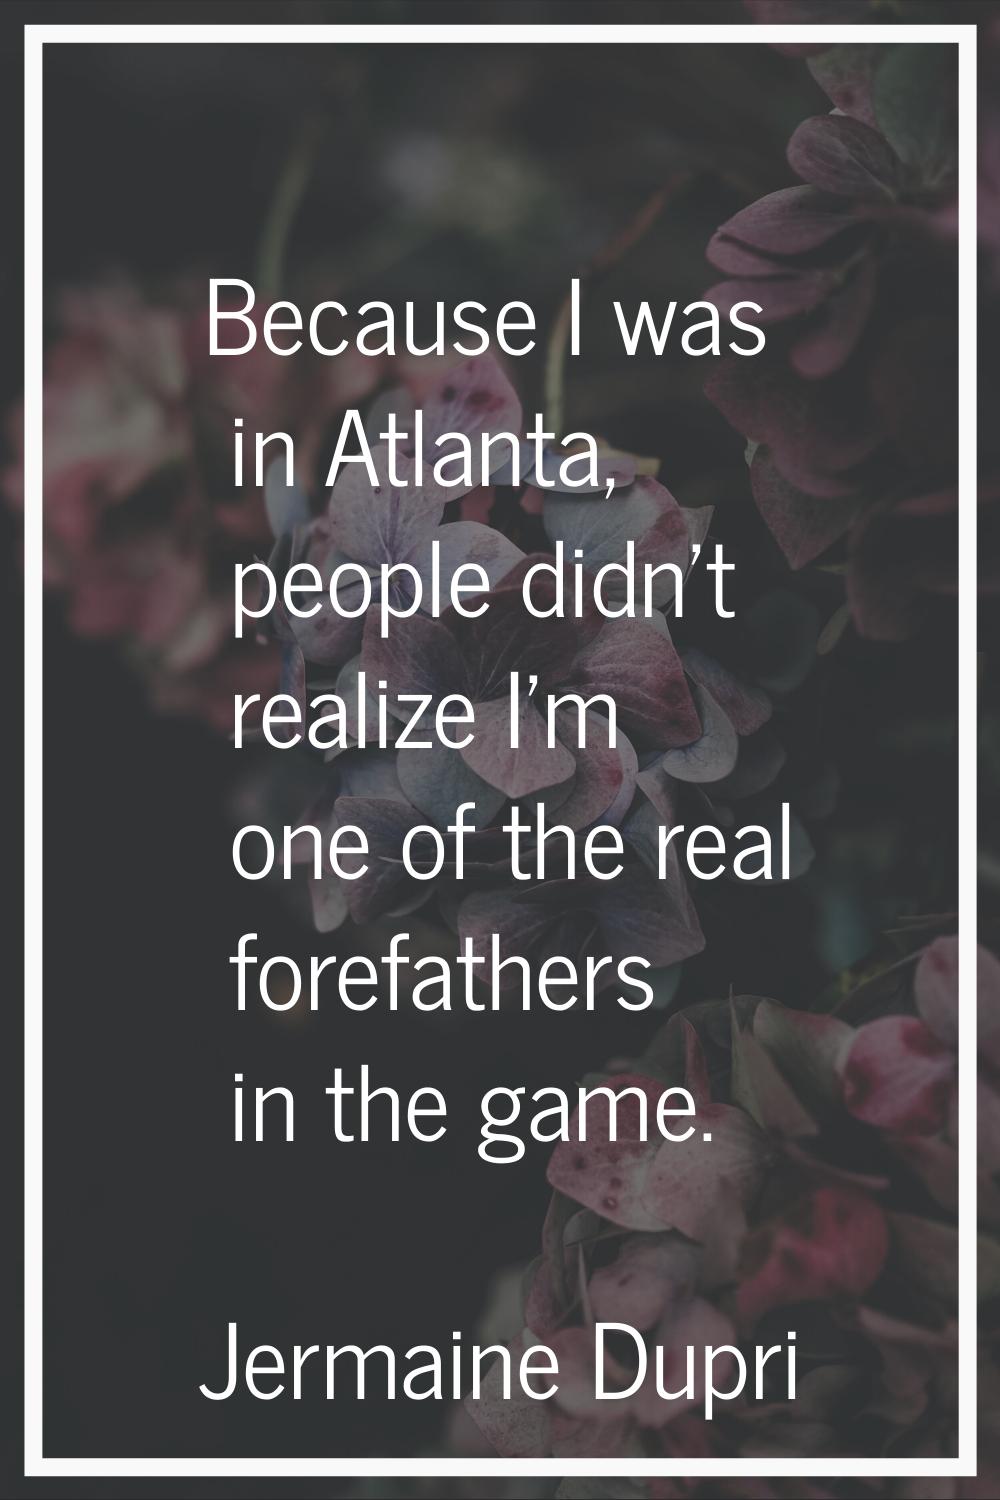 Because I was in Atlanta, people didn't realize I'm one of the real forefathers in the game.